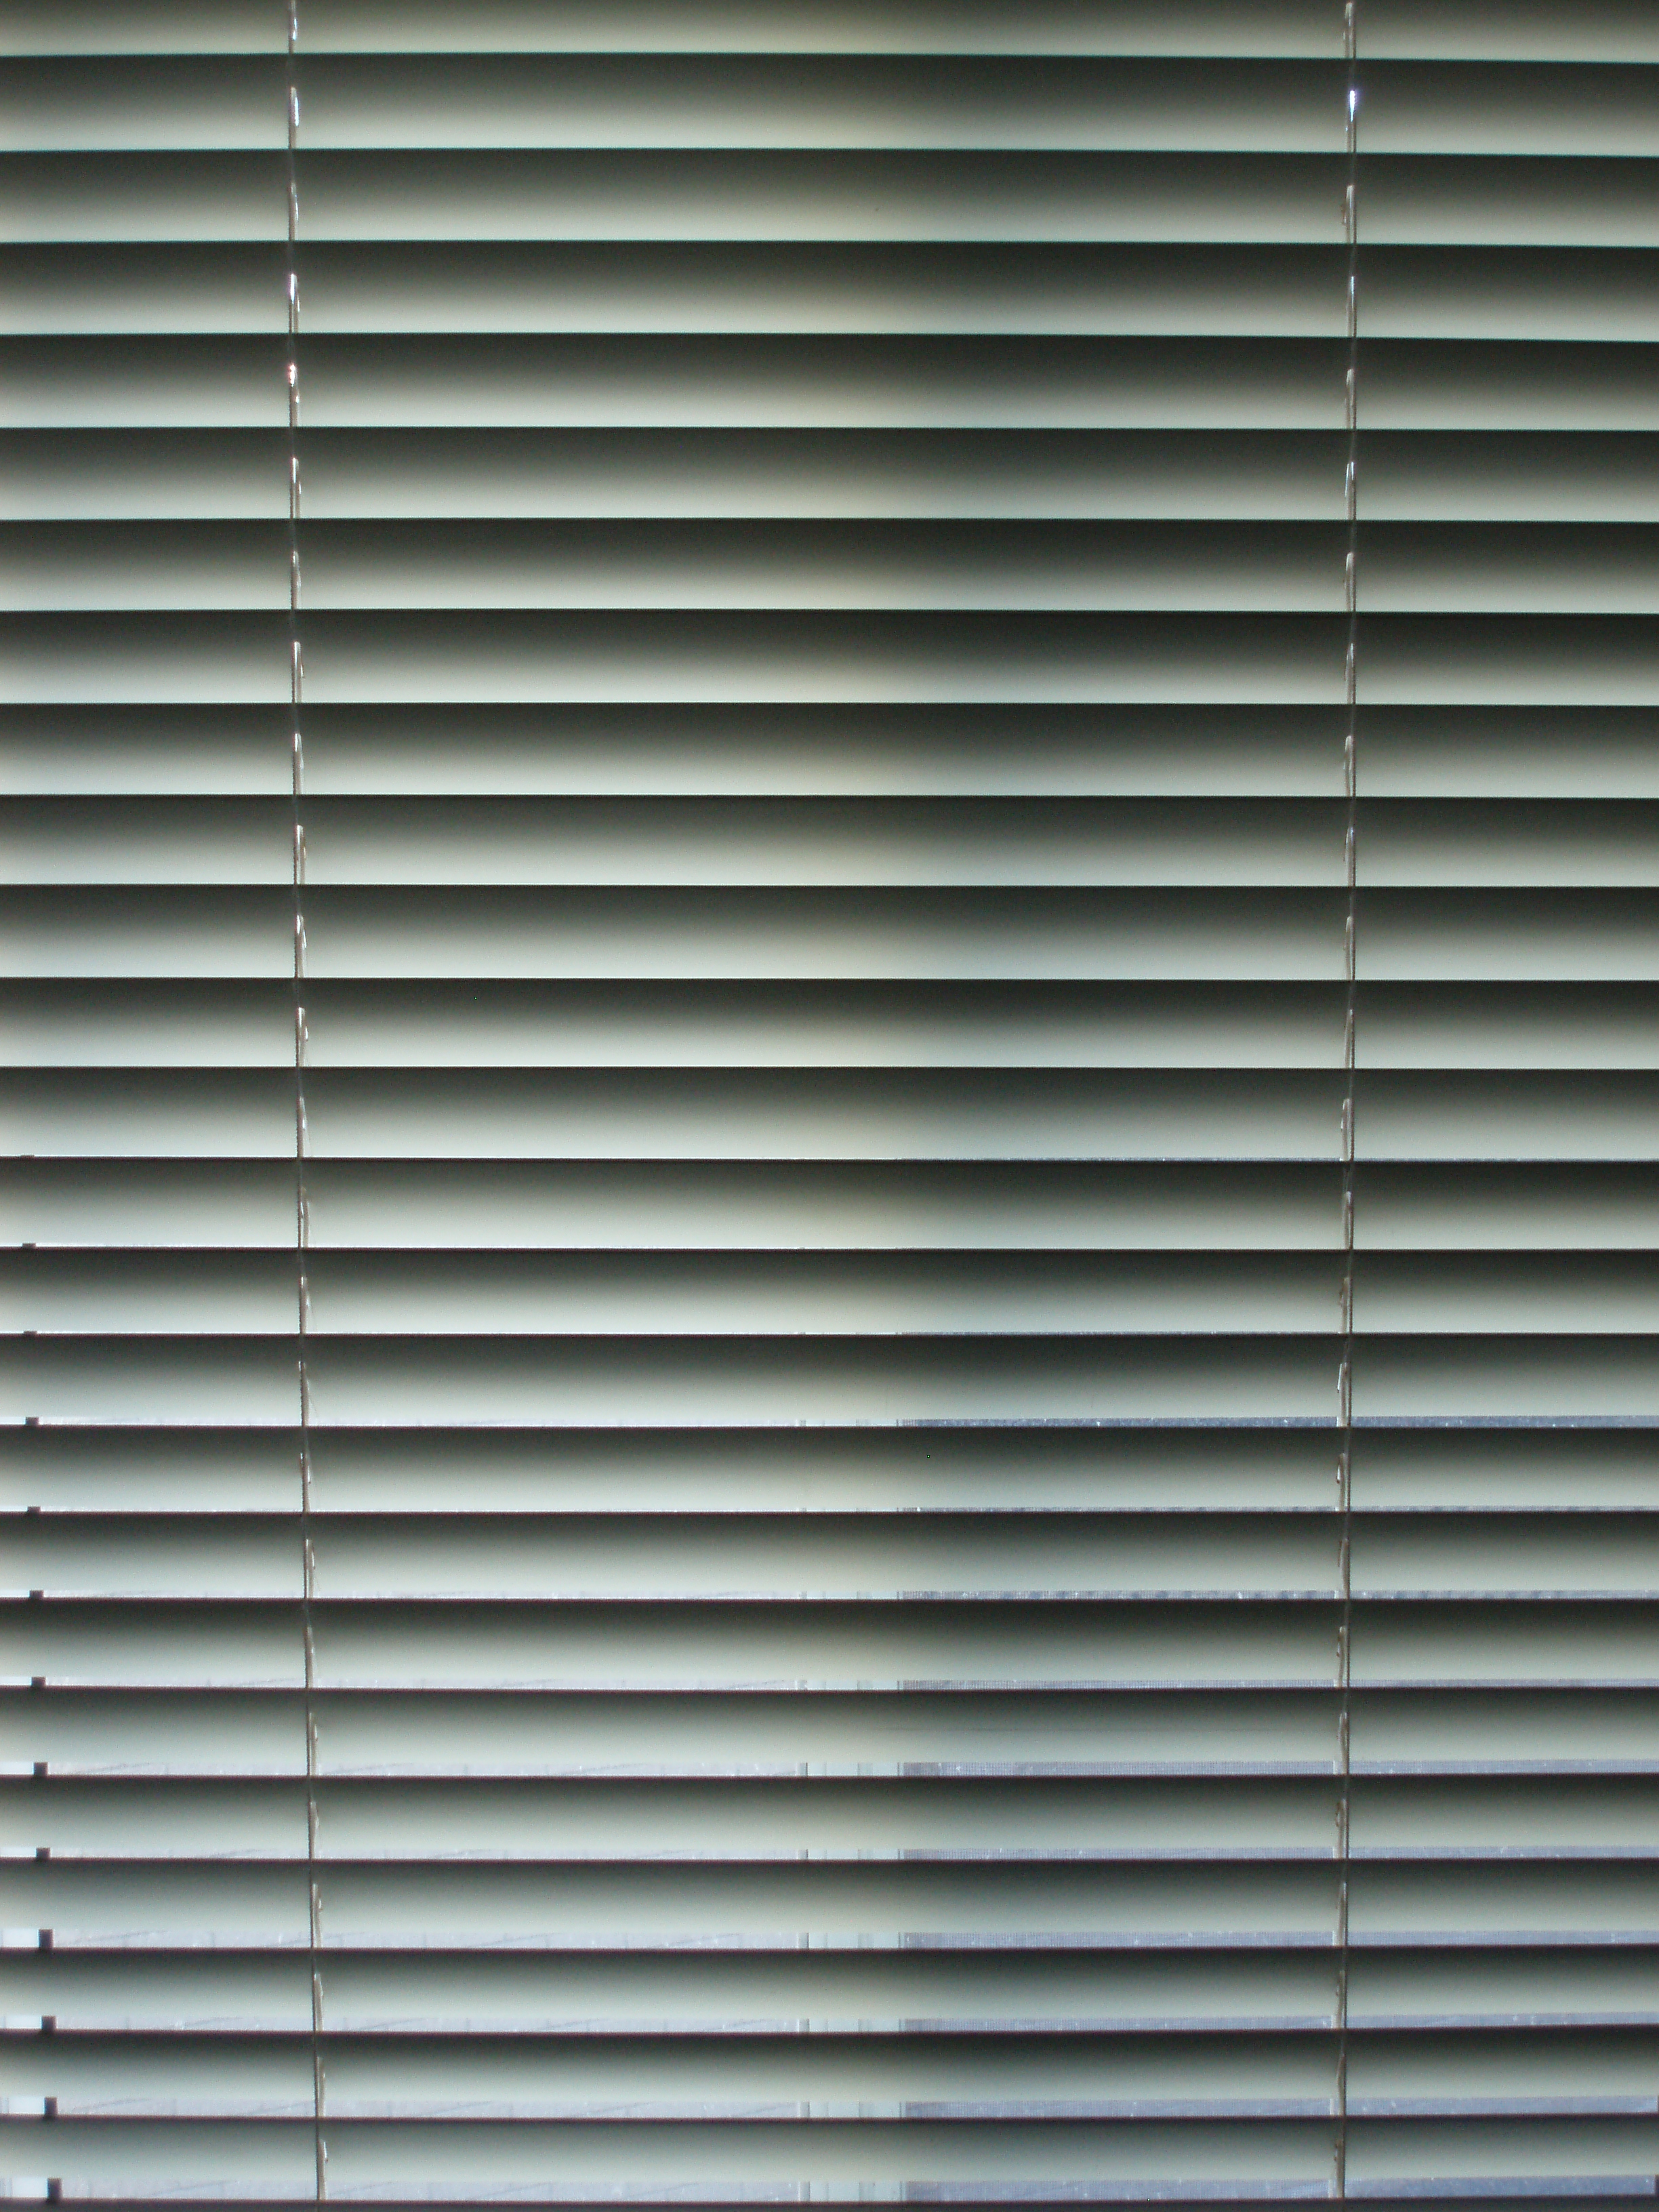 WINDOW BLIND - FREE DOWNLOAD WINDOW BLIND- SOFT82 SEARCH